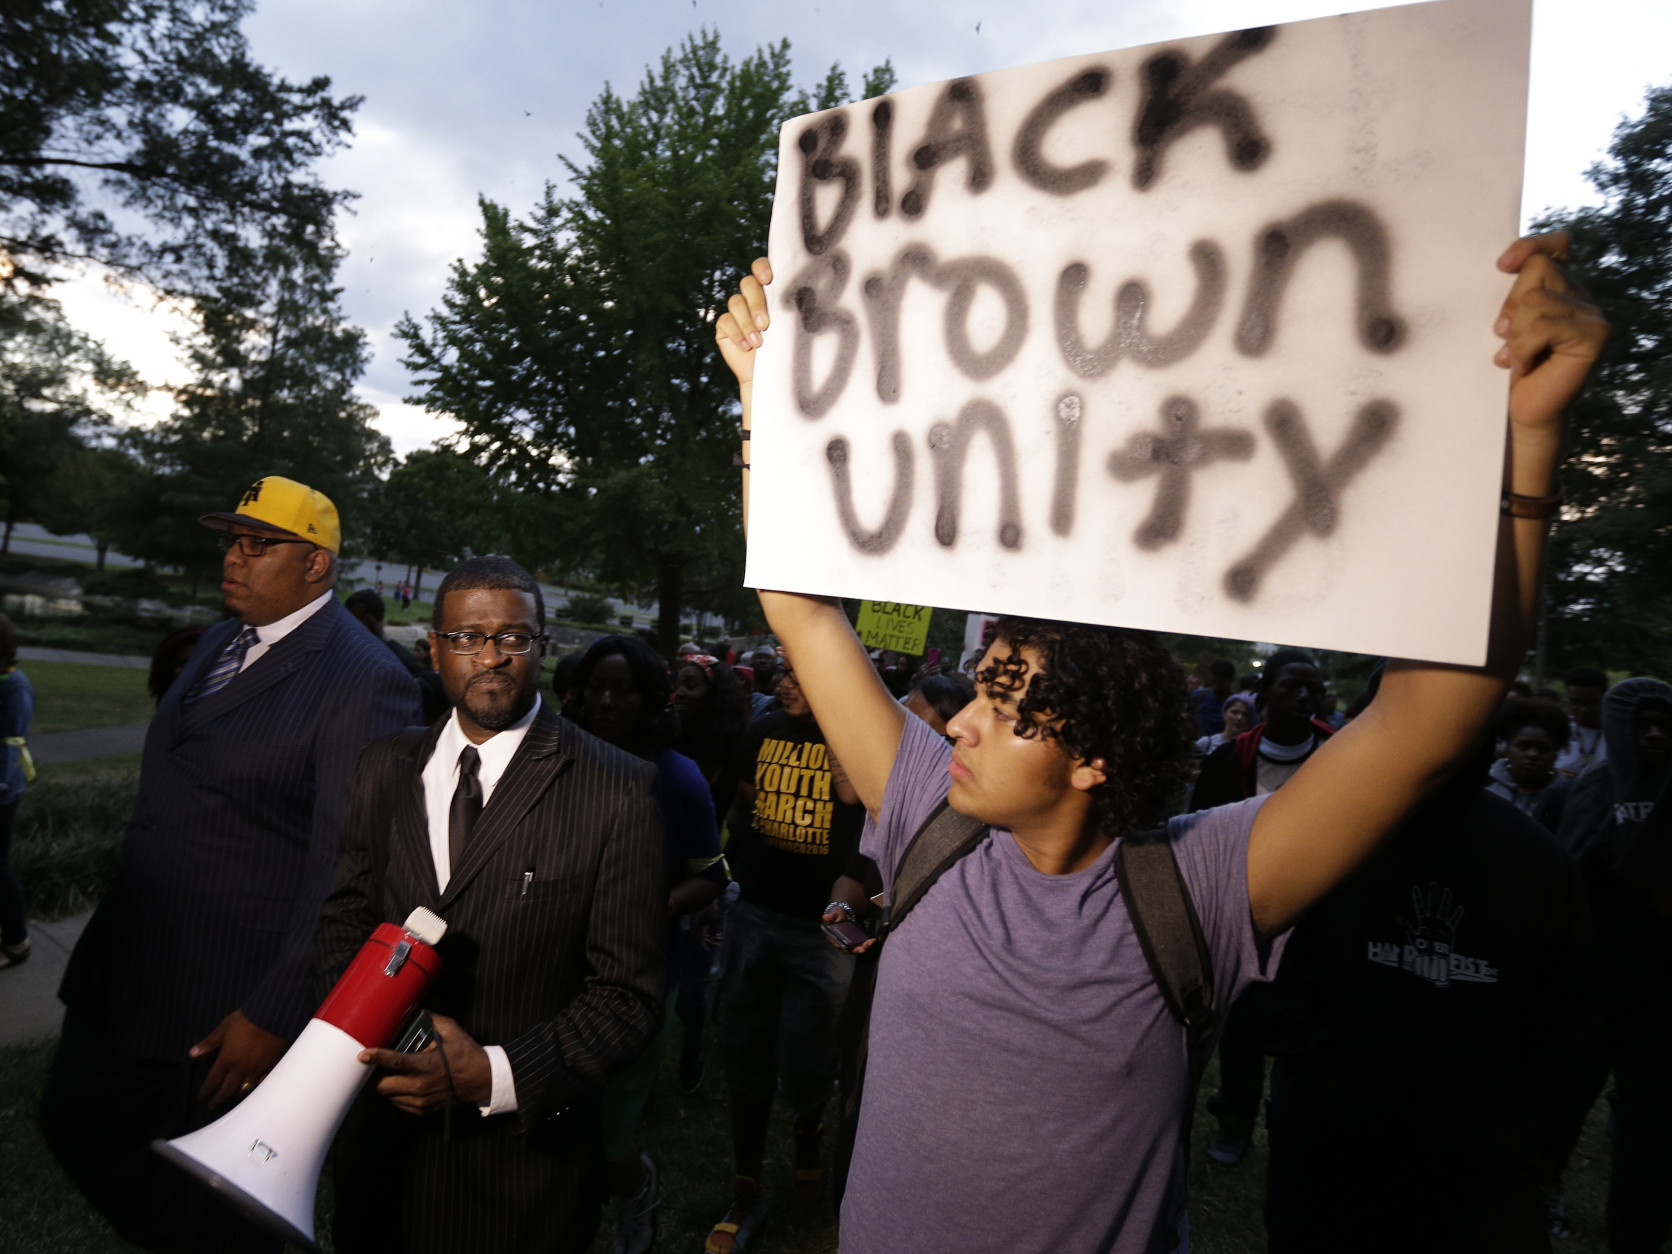 Demonstrators protest Tuesday's fatal police shooting of Keith Lamont Scott in Charlotte, N.C. on Wednesday, Sept. 21, 2016. Authorities tried to quell public anger and correct what they characterized as false information Wednesday after a night of looting and arson added Charlotte to the list of U.S. cities that have erupted in violence over the death of a black man at the hands of police.With officials refusing to release any video of the shooting of 43-year-old Keith Lamont Scott, two starkly different versions emerged: Police say Scott disregarded repeated demands to drop his gun, while neighborhood residents say he was holding a book, not a weapon, as he waited for his son to get off the school bus. (AP Photo/Chuck Burton)